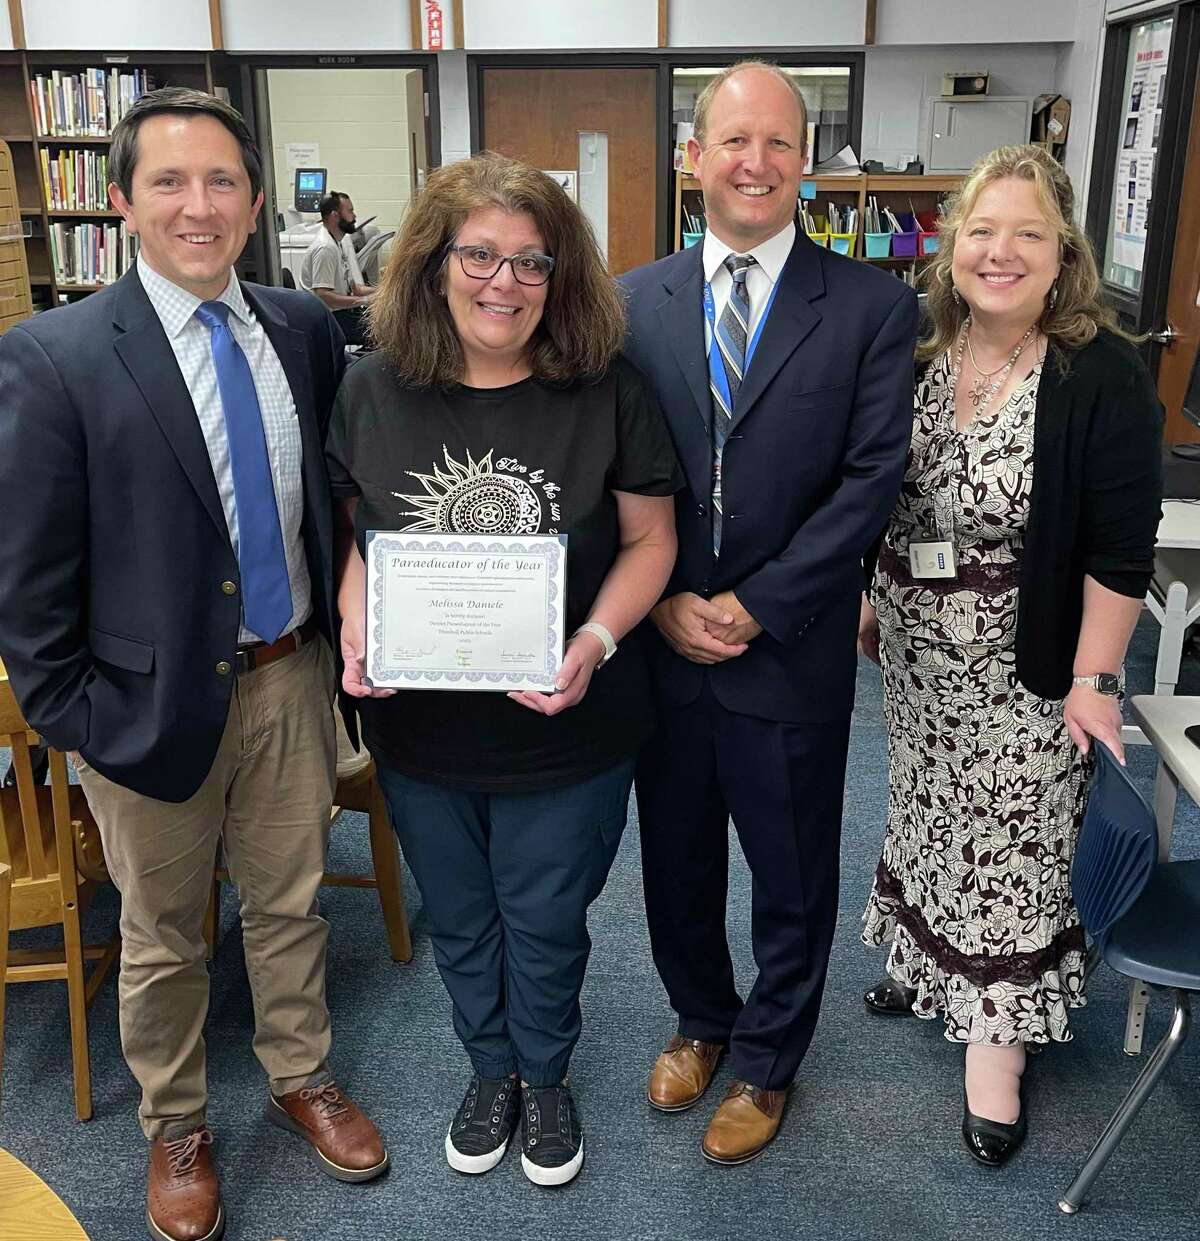 Trumbull Public School Paraprofessional of the Year 2023 Melissa Daniele (second from left) with Hillcrest Middlle School Principal Bryan Rickert, Superintendent Marty Semmel, and Assistant Superintendent Susan Iwanicki. Daniele was presented with district recognition June 10, 2022.